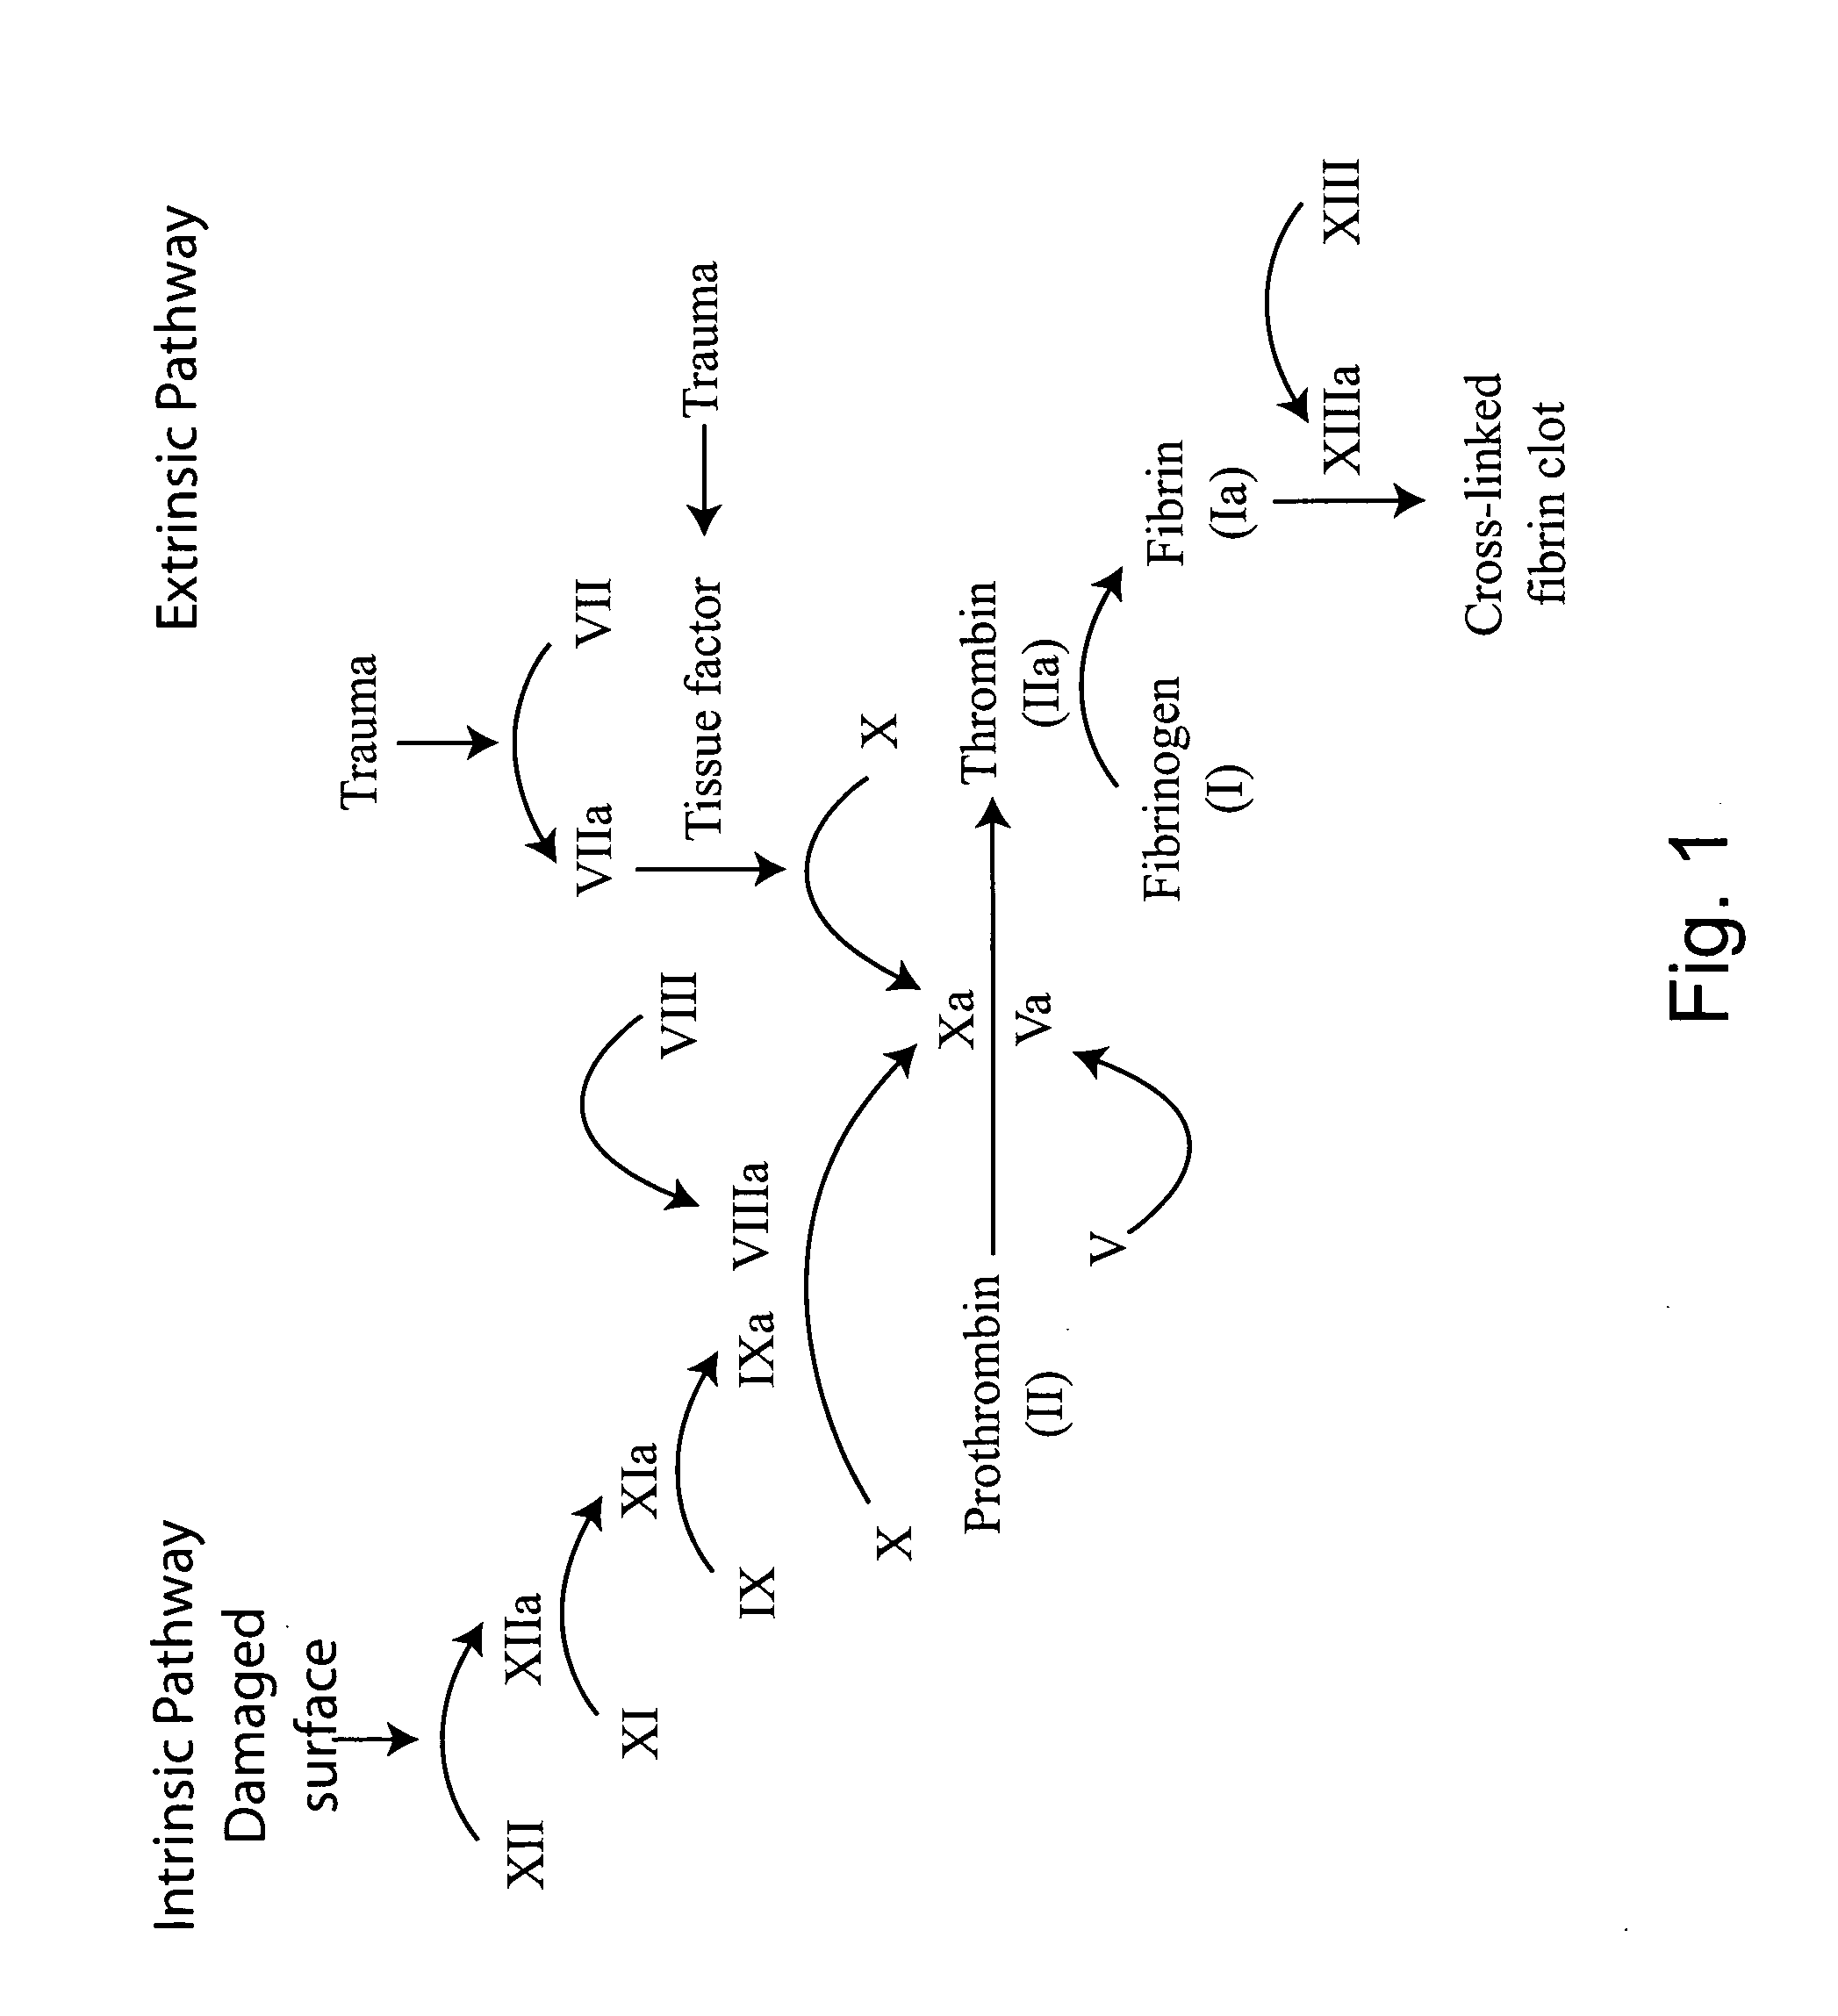 Inductive coagulation sensors and devices